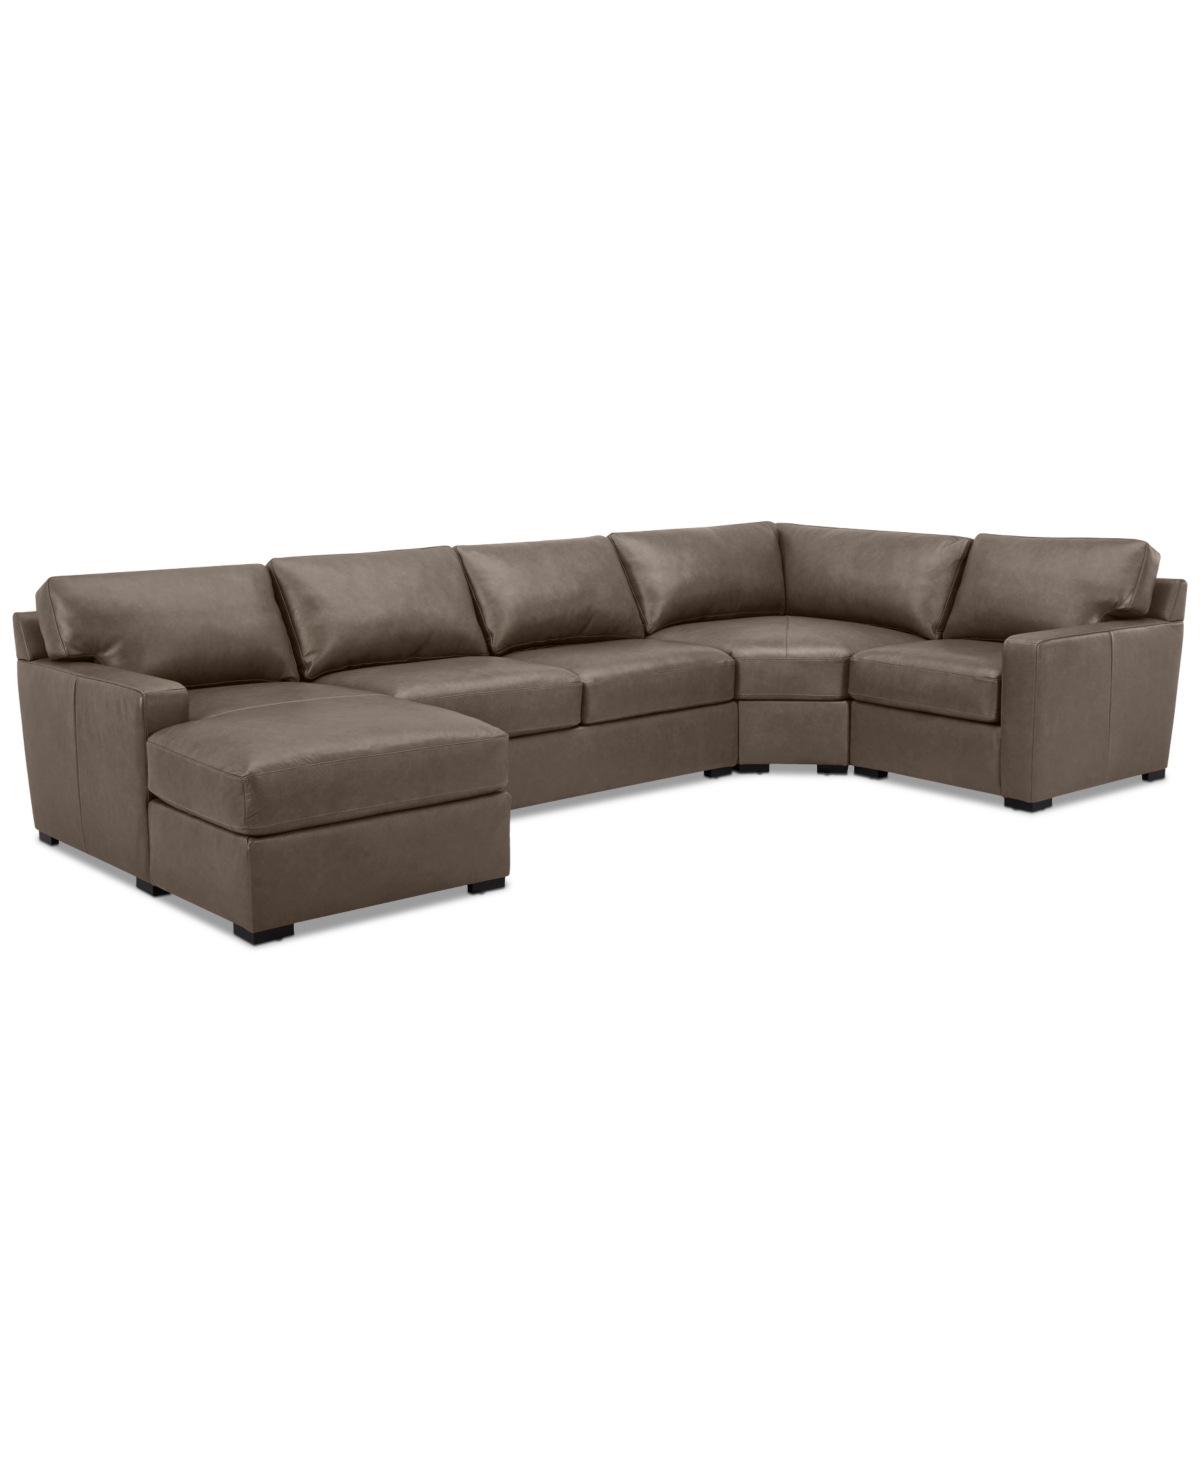 Macy's Radley 148" 4-pc. Leather Wedge Modular Chaise Sectional, Created For  In Gray